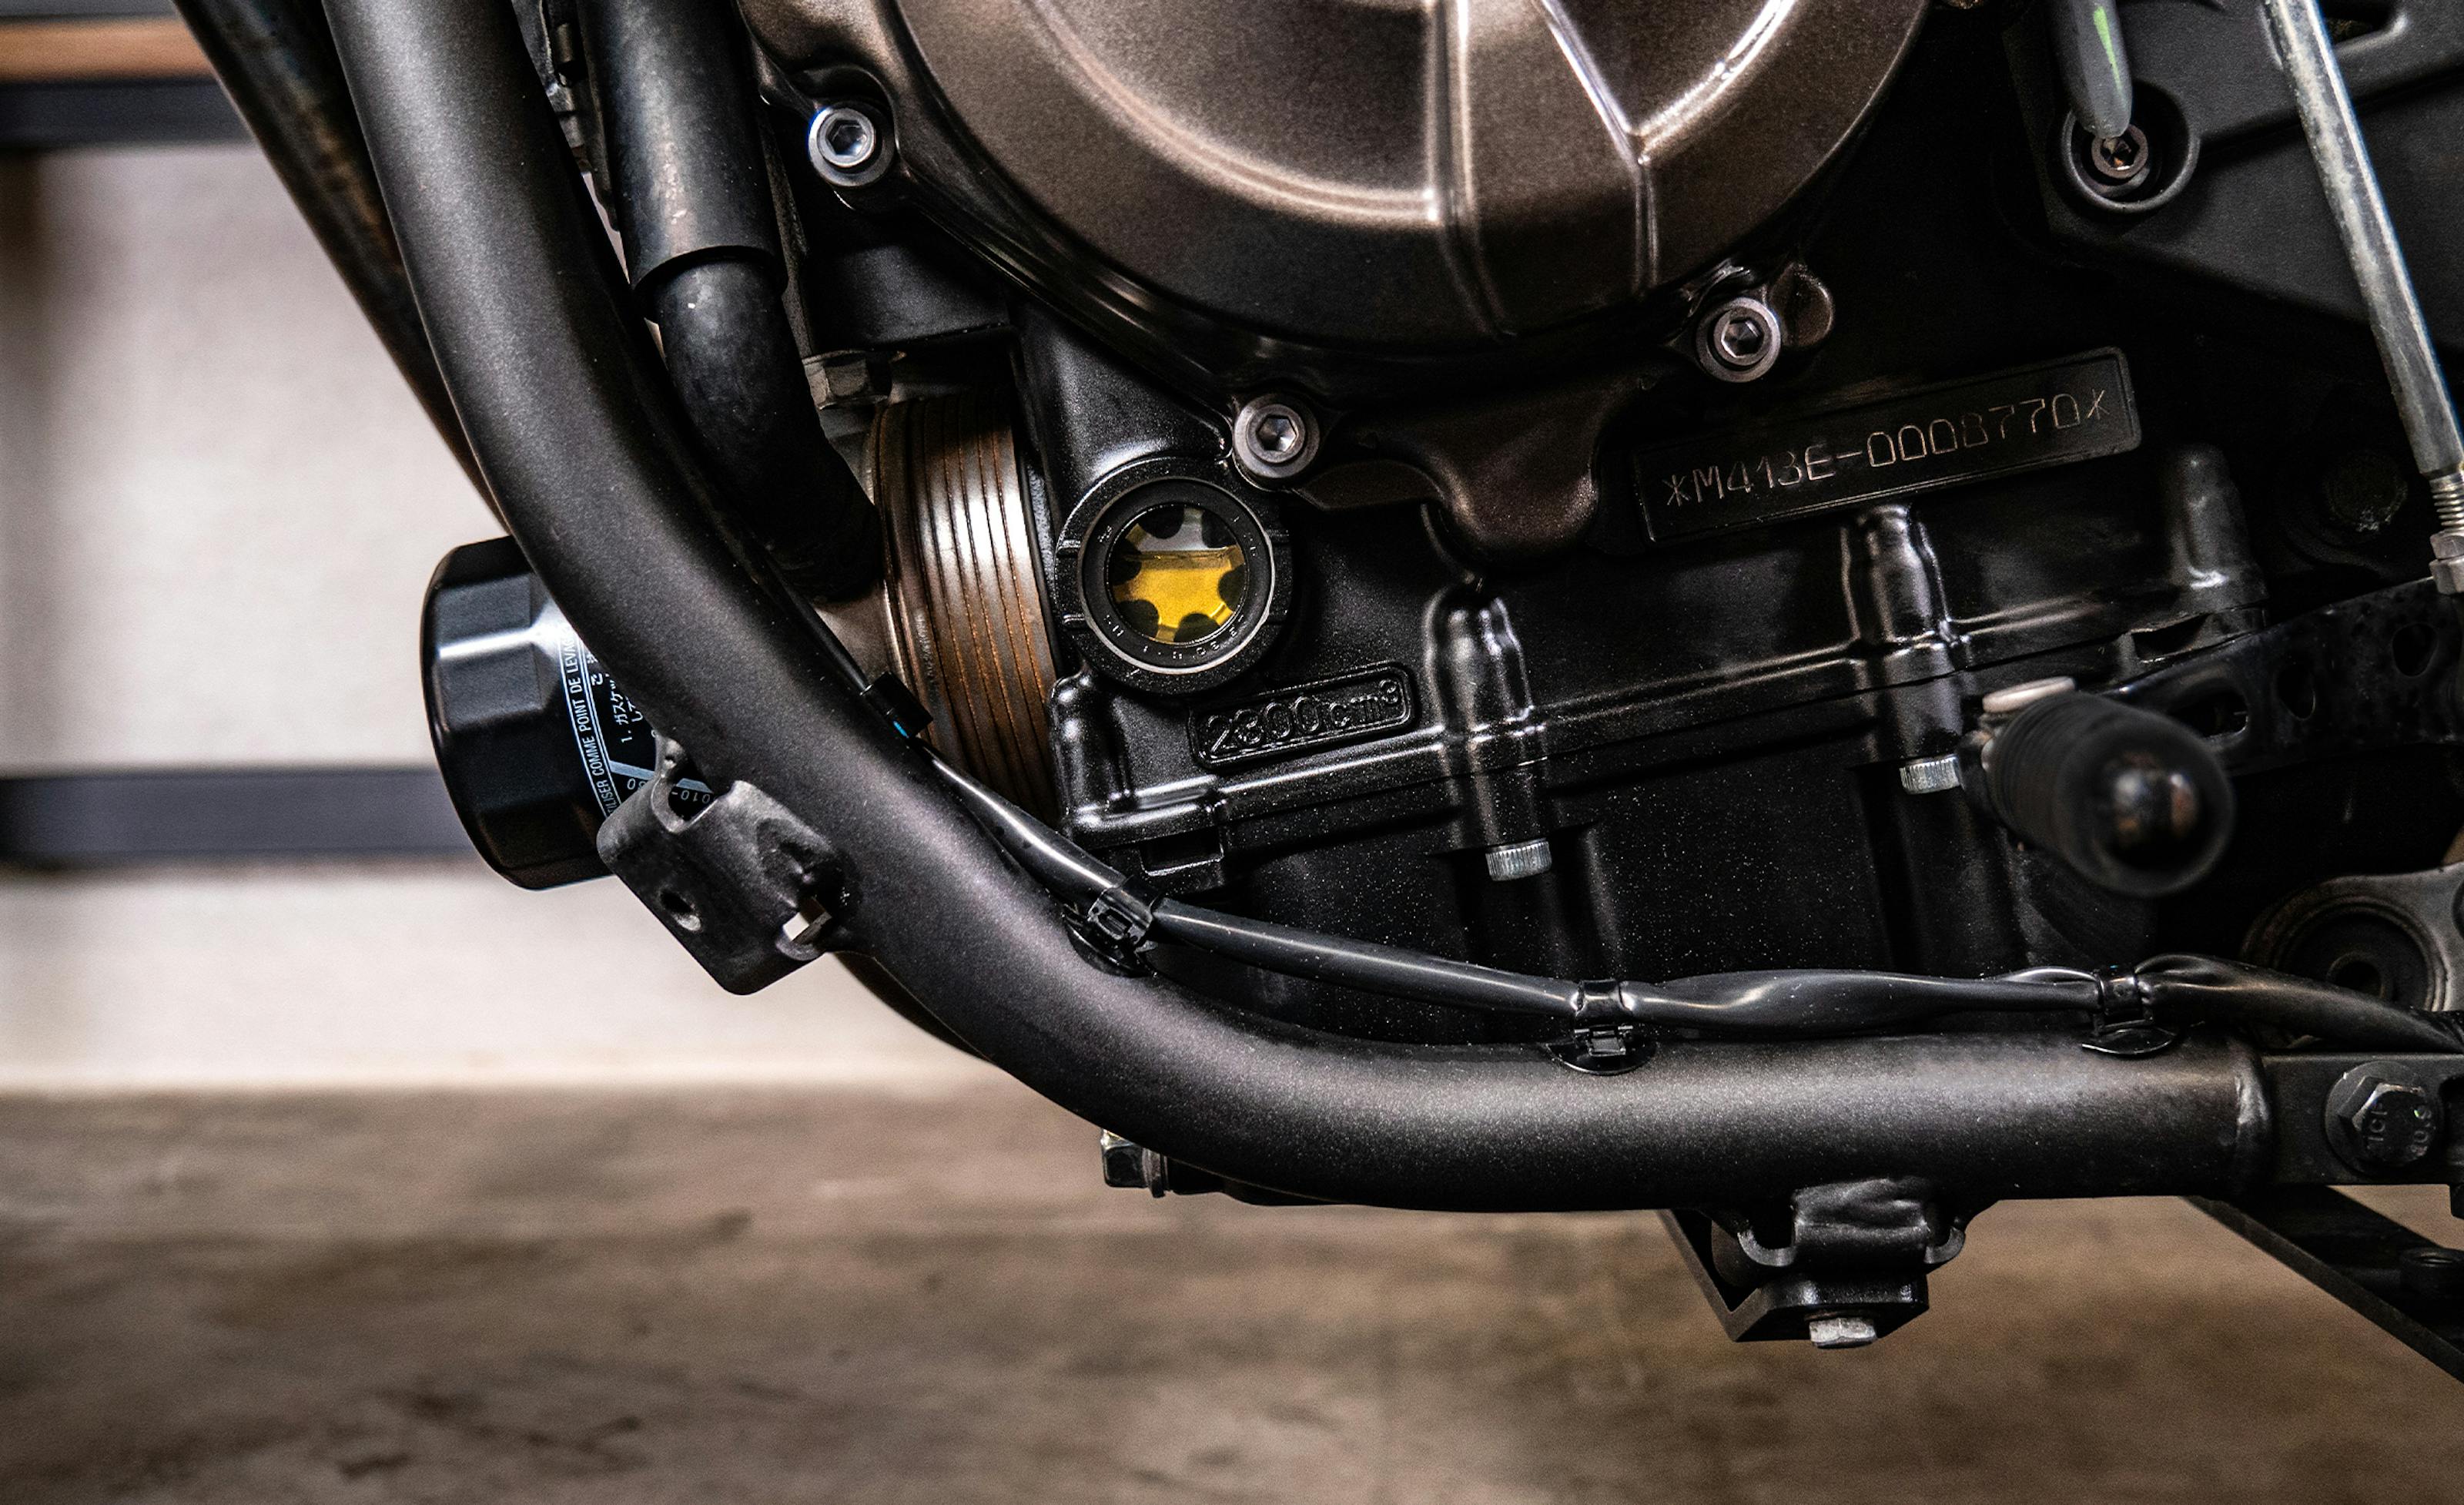 Do your motorcycle's oil change like a pro